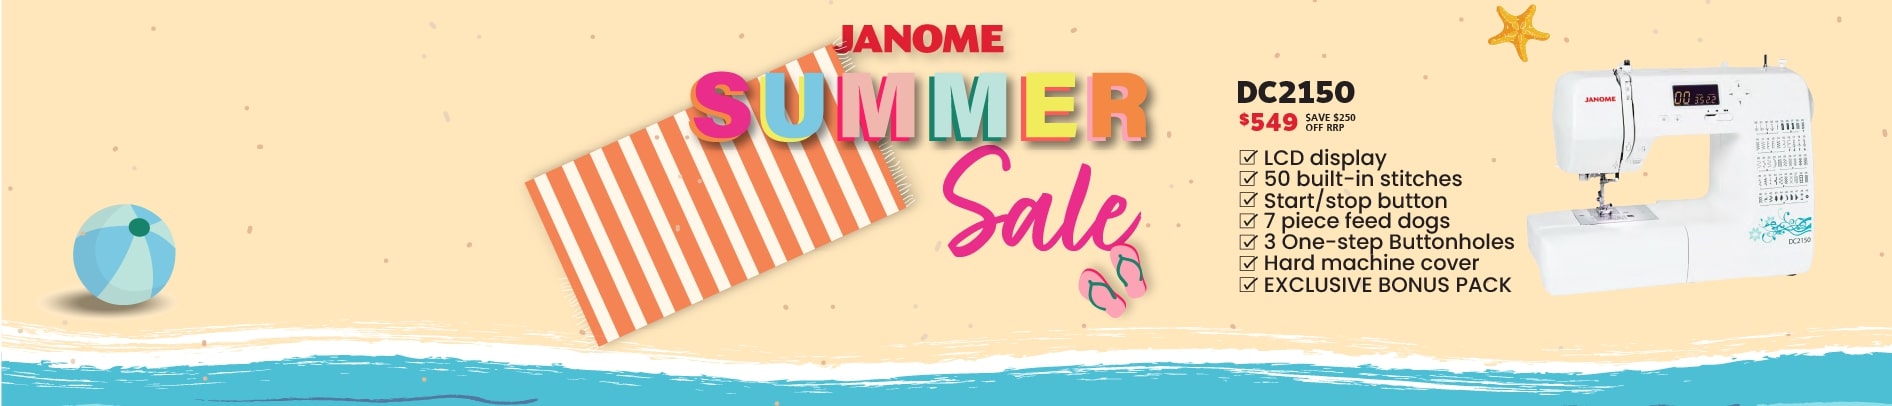 Janome Summer Sale - Banner - DC2150